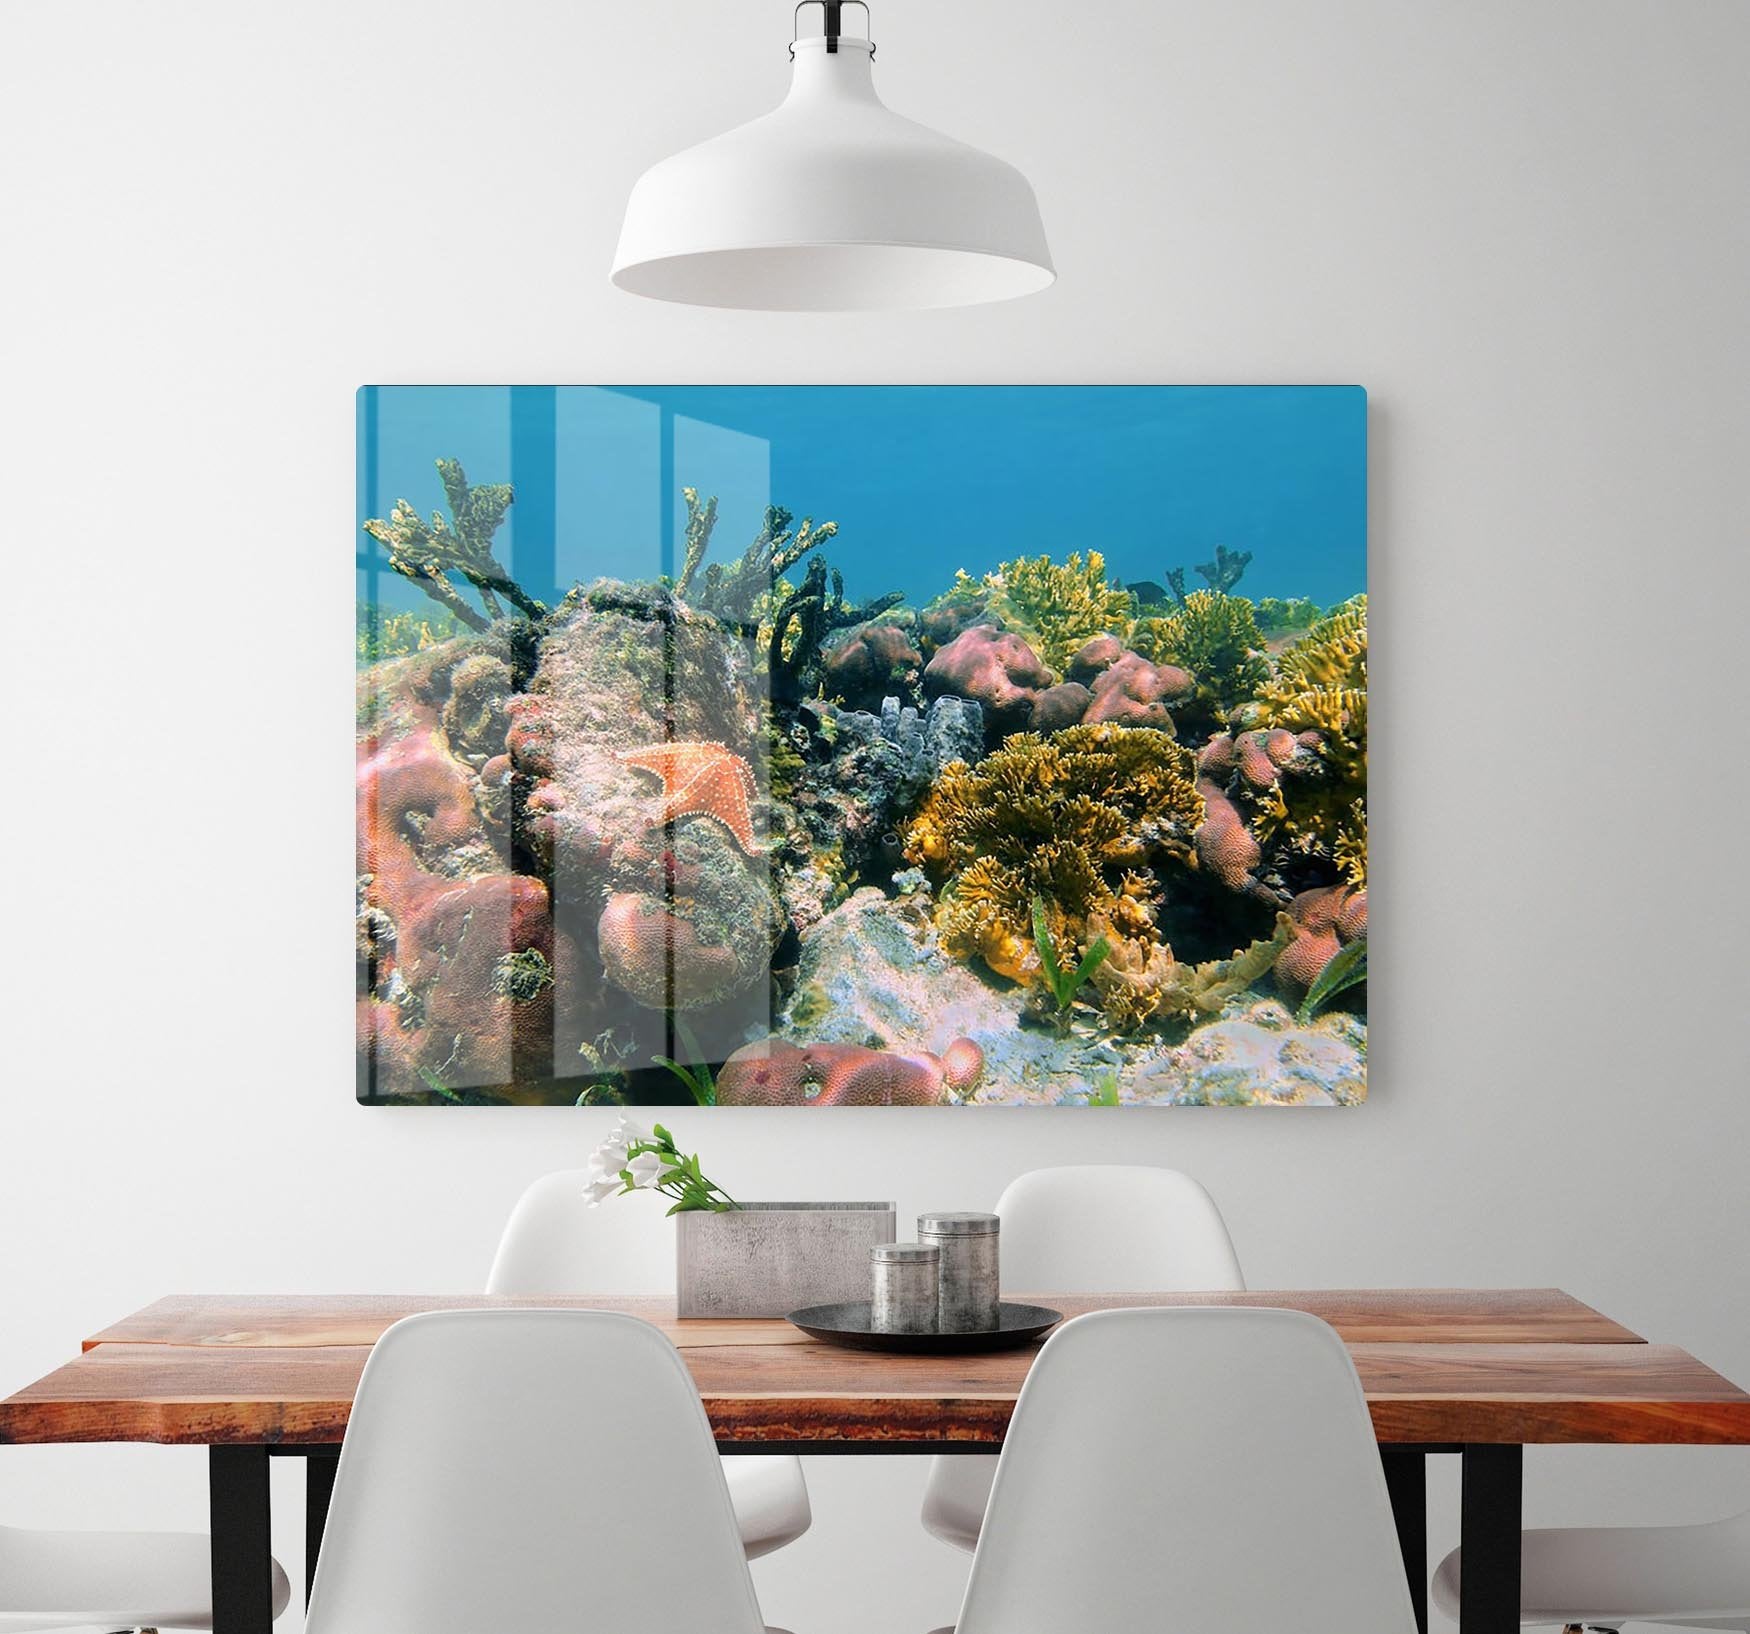 Underwater reef in the Caribbean sea with corals sponges and a starfish HD Metal Print - Canvas Art Rocks - 2